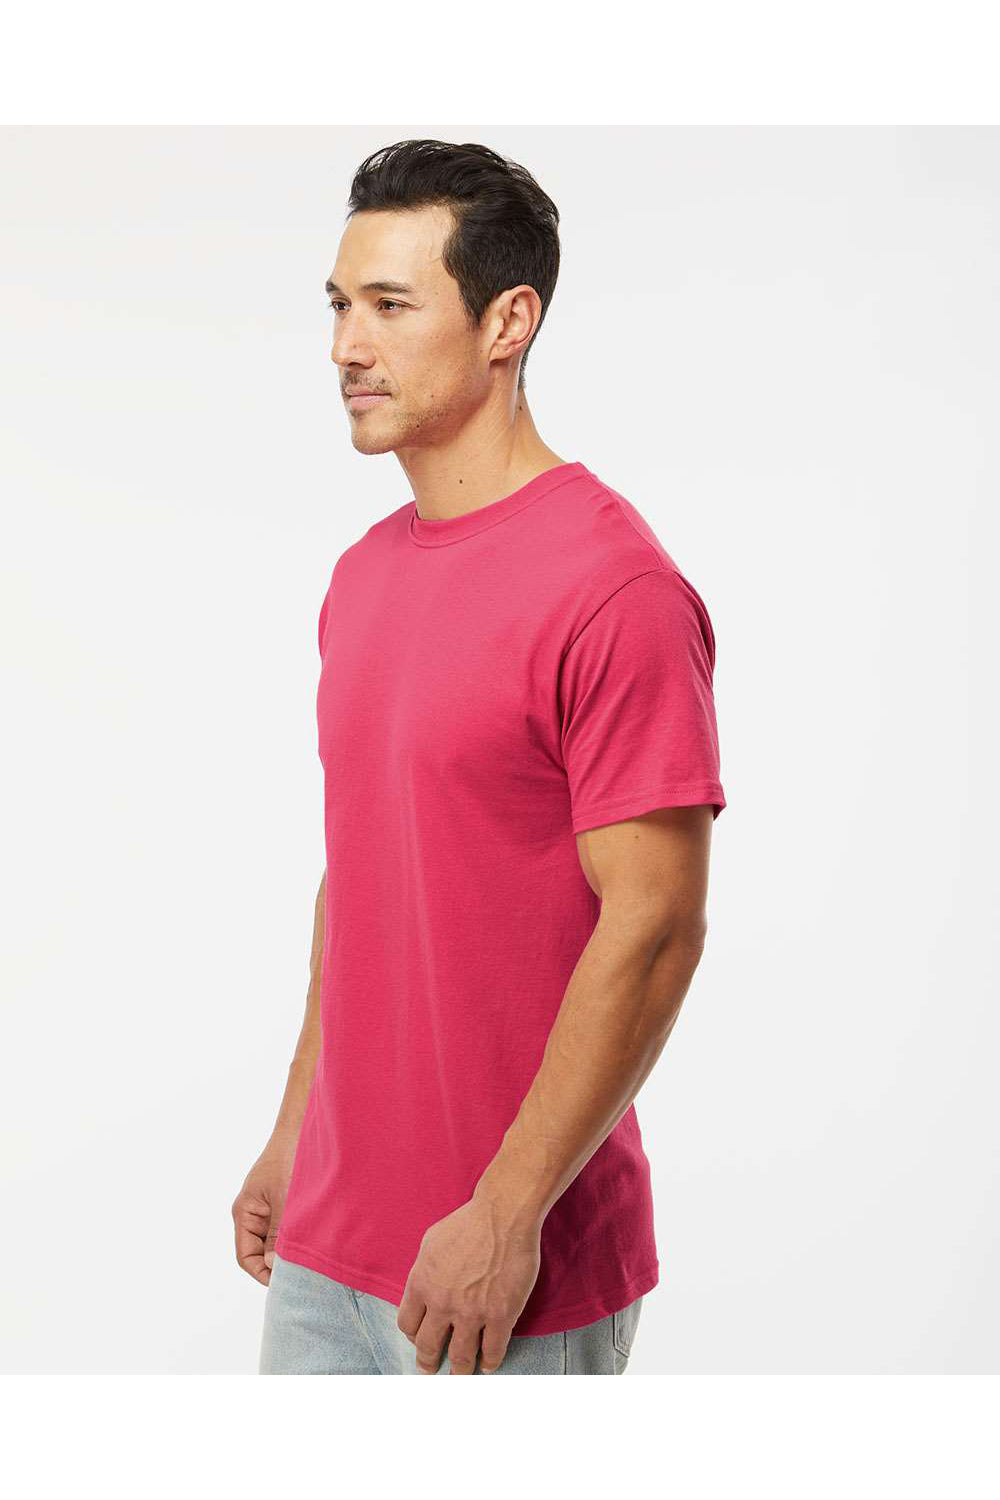 M&O 4800 Mens Gold Soft Touch Short Sleeve Crewneck T-Shirt Heliconia Pink Model Side